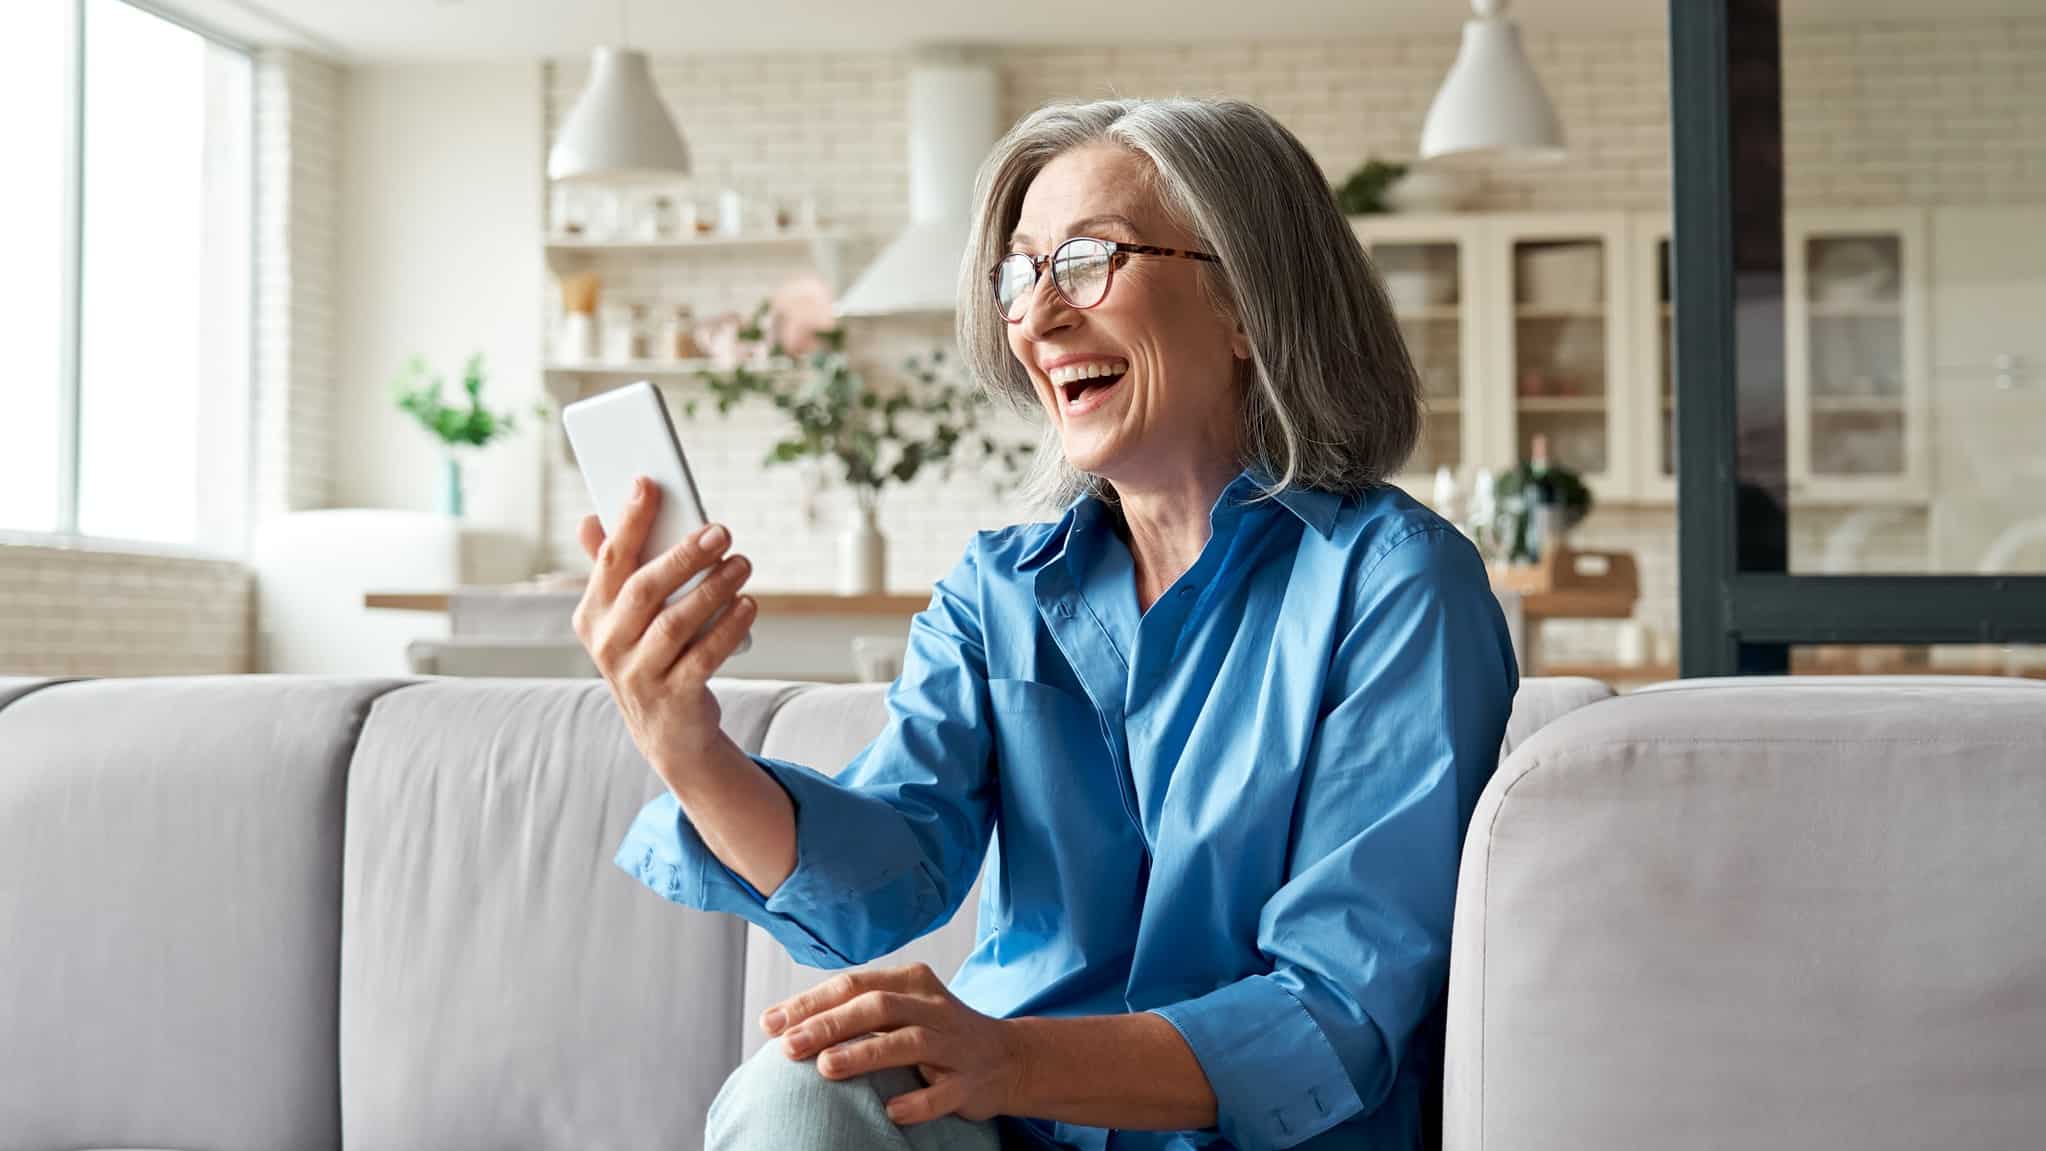 A sophisticated older lady with shoulder-length grey hair and glasses sits on her couch laughing while looking at her ASX 200 shares rising on her phone